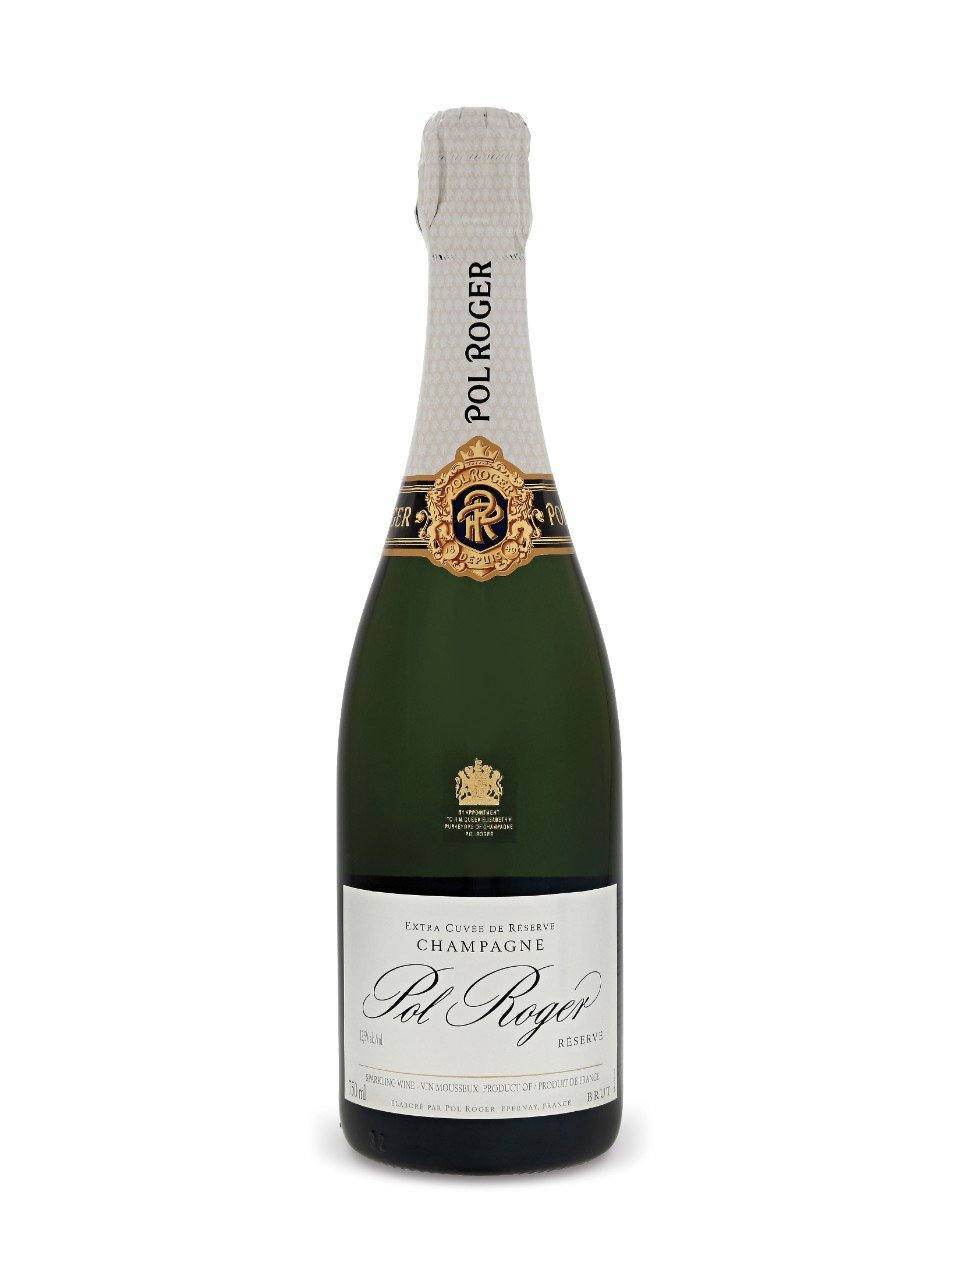 Pol Roger Brut Champagne - Vyno | Same day alcohol delivery  